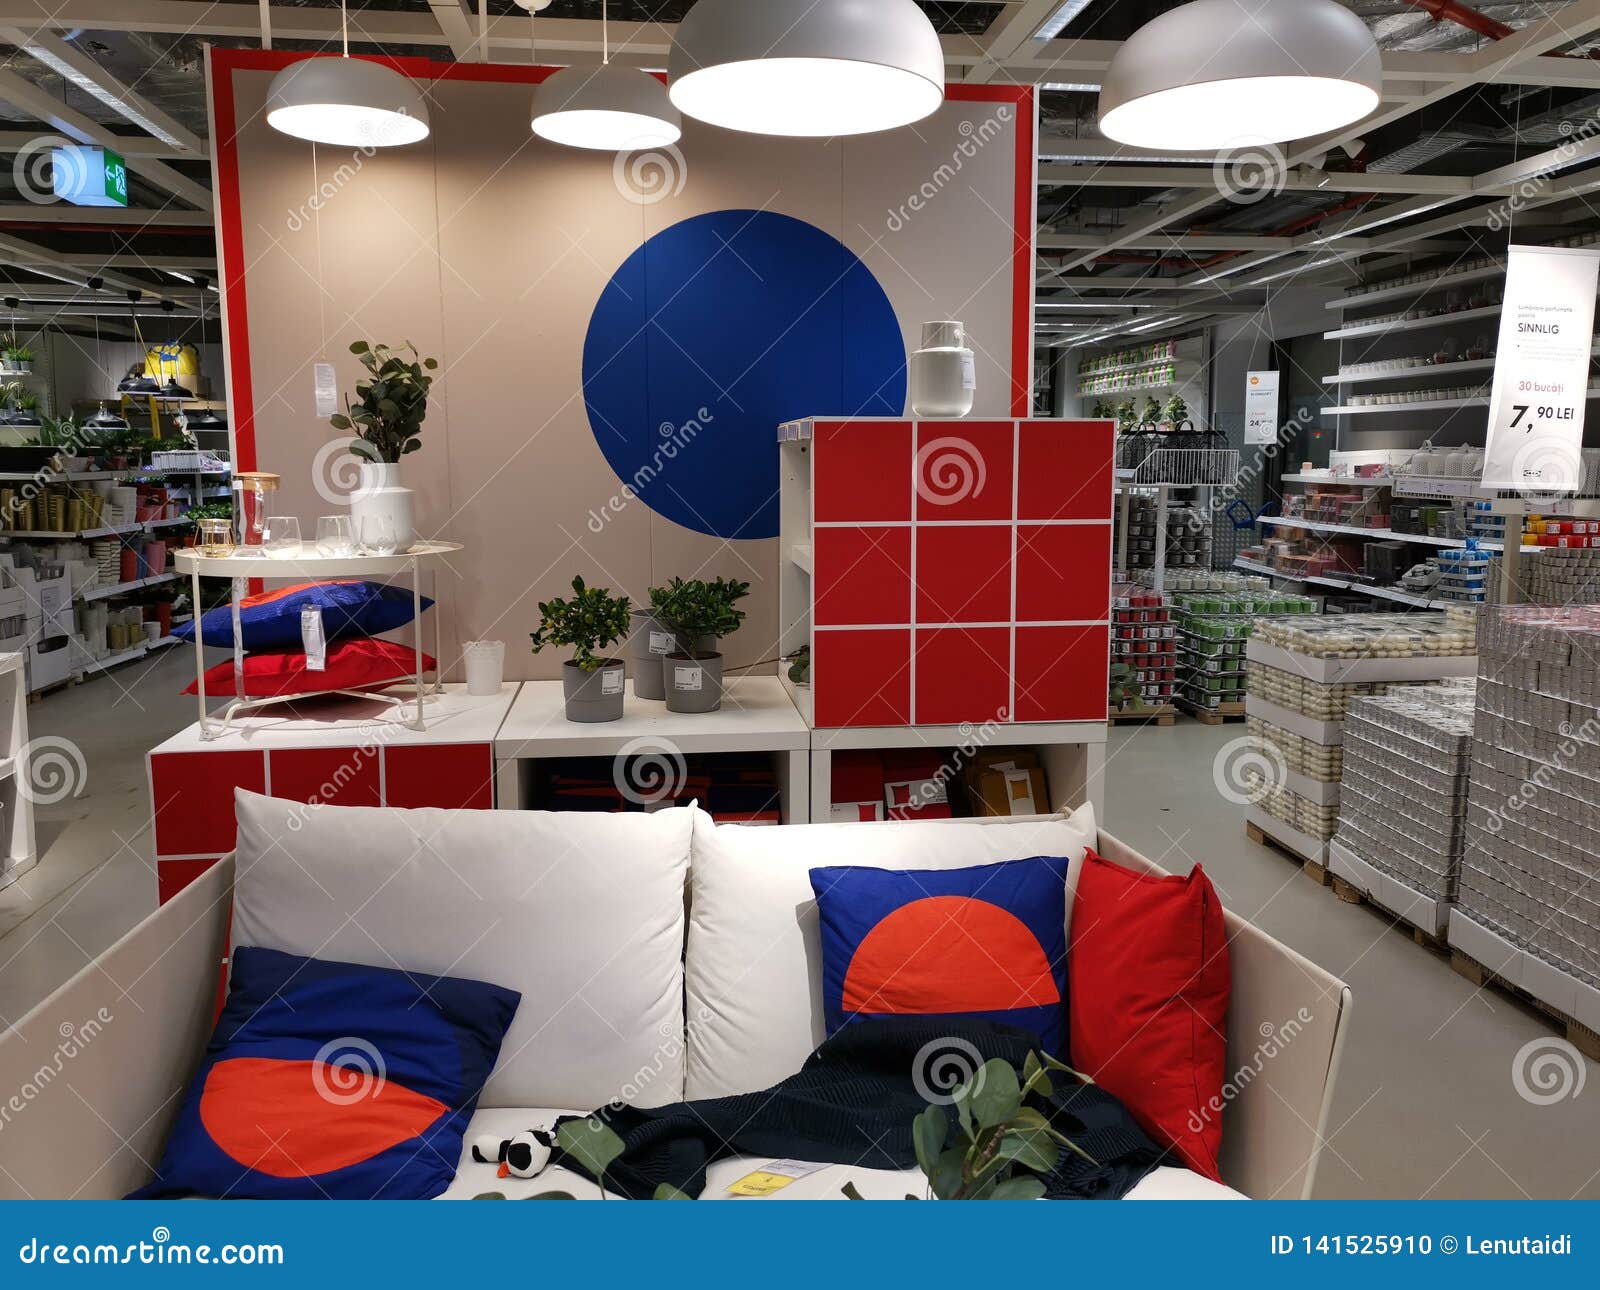 news Thorough Foresee Indoor Furniture Design - Ikea Store Editorial Image - Image of romania,  store: 141525910